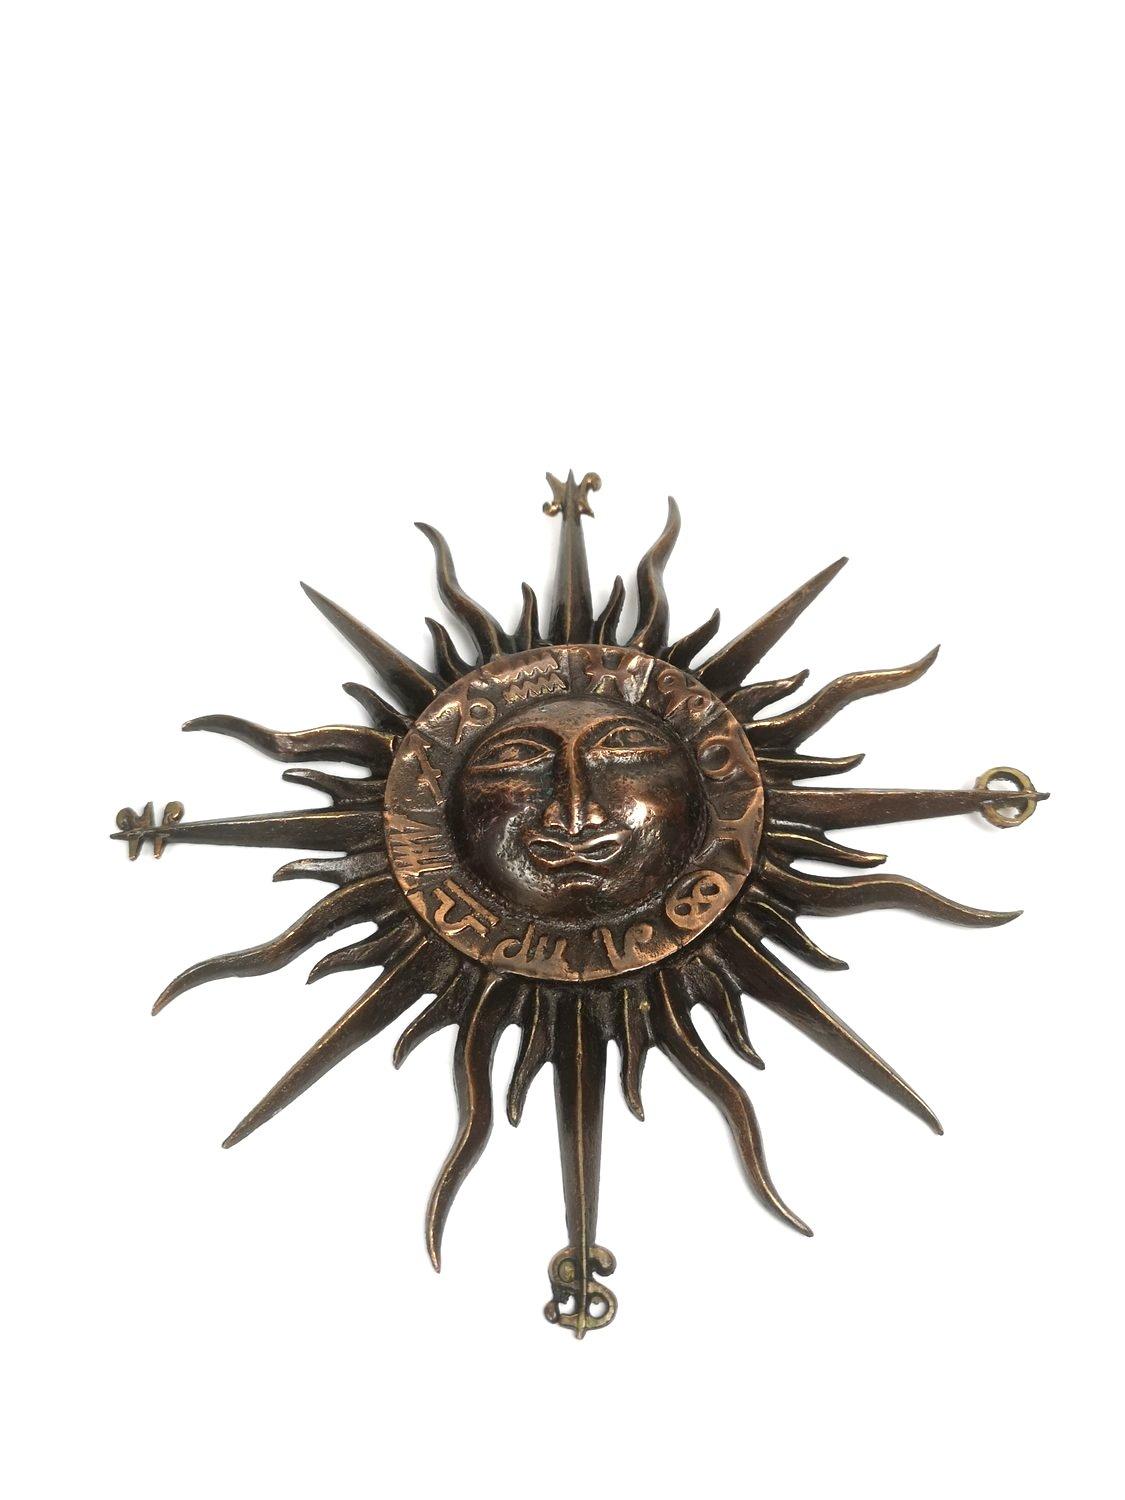 Mid-Century Modern bronze wall plate from the 1960's depicting the sun and the signs of the Zodiac.